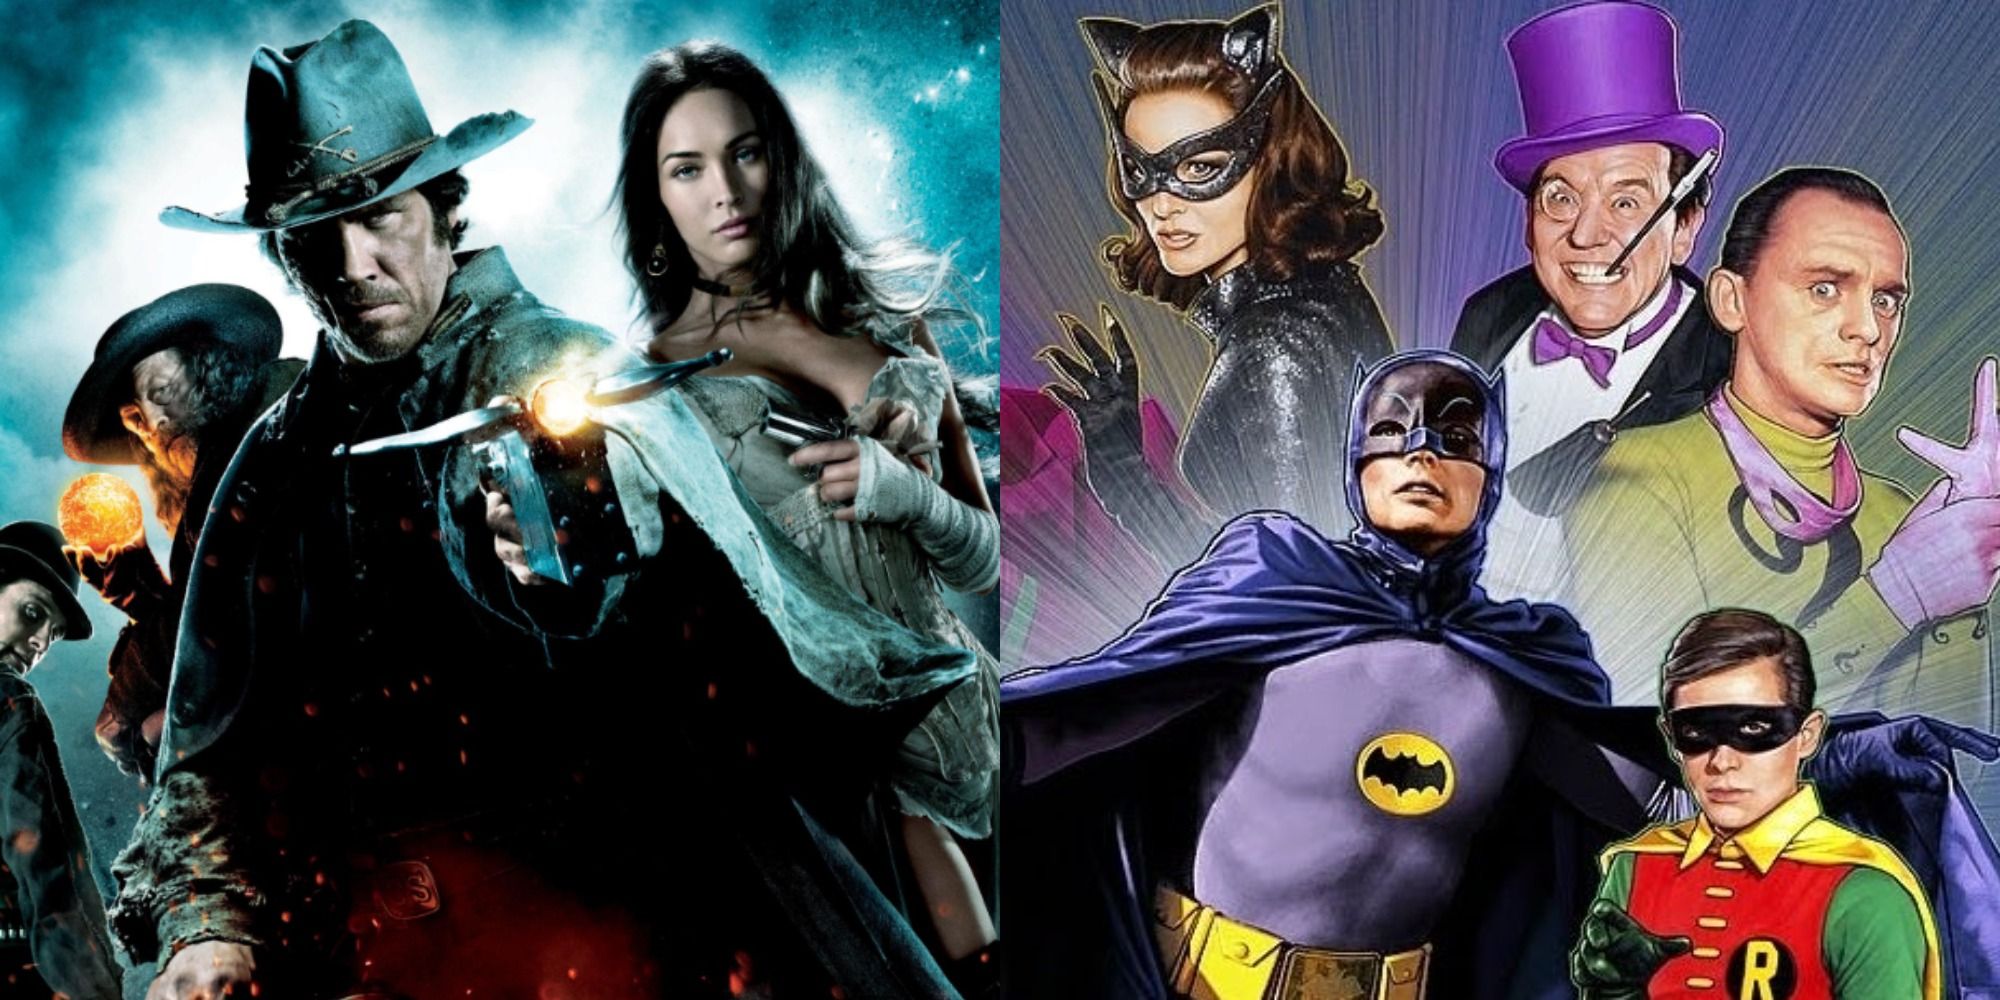 Split image showing characters from Jonah Hex and Batman: The Movie